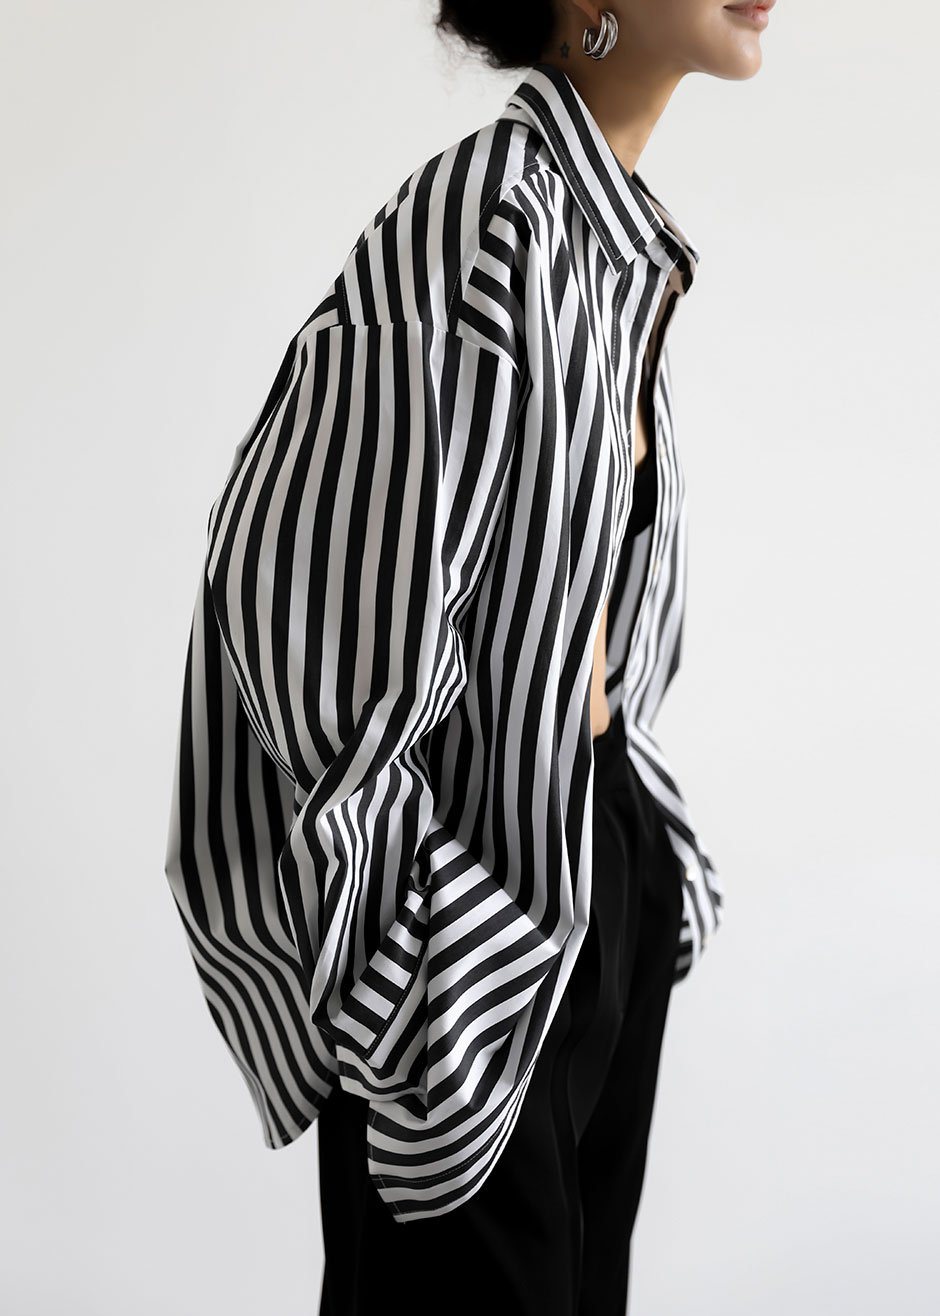 Lycra Stripes Mens Black And White Striped Shirt, Half Sleeves, Casual Wear  at Rs 399/box in Surat